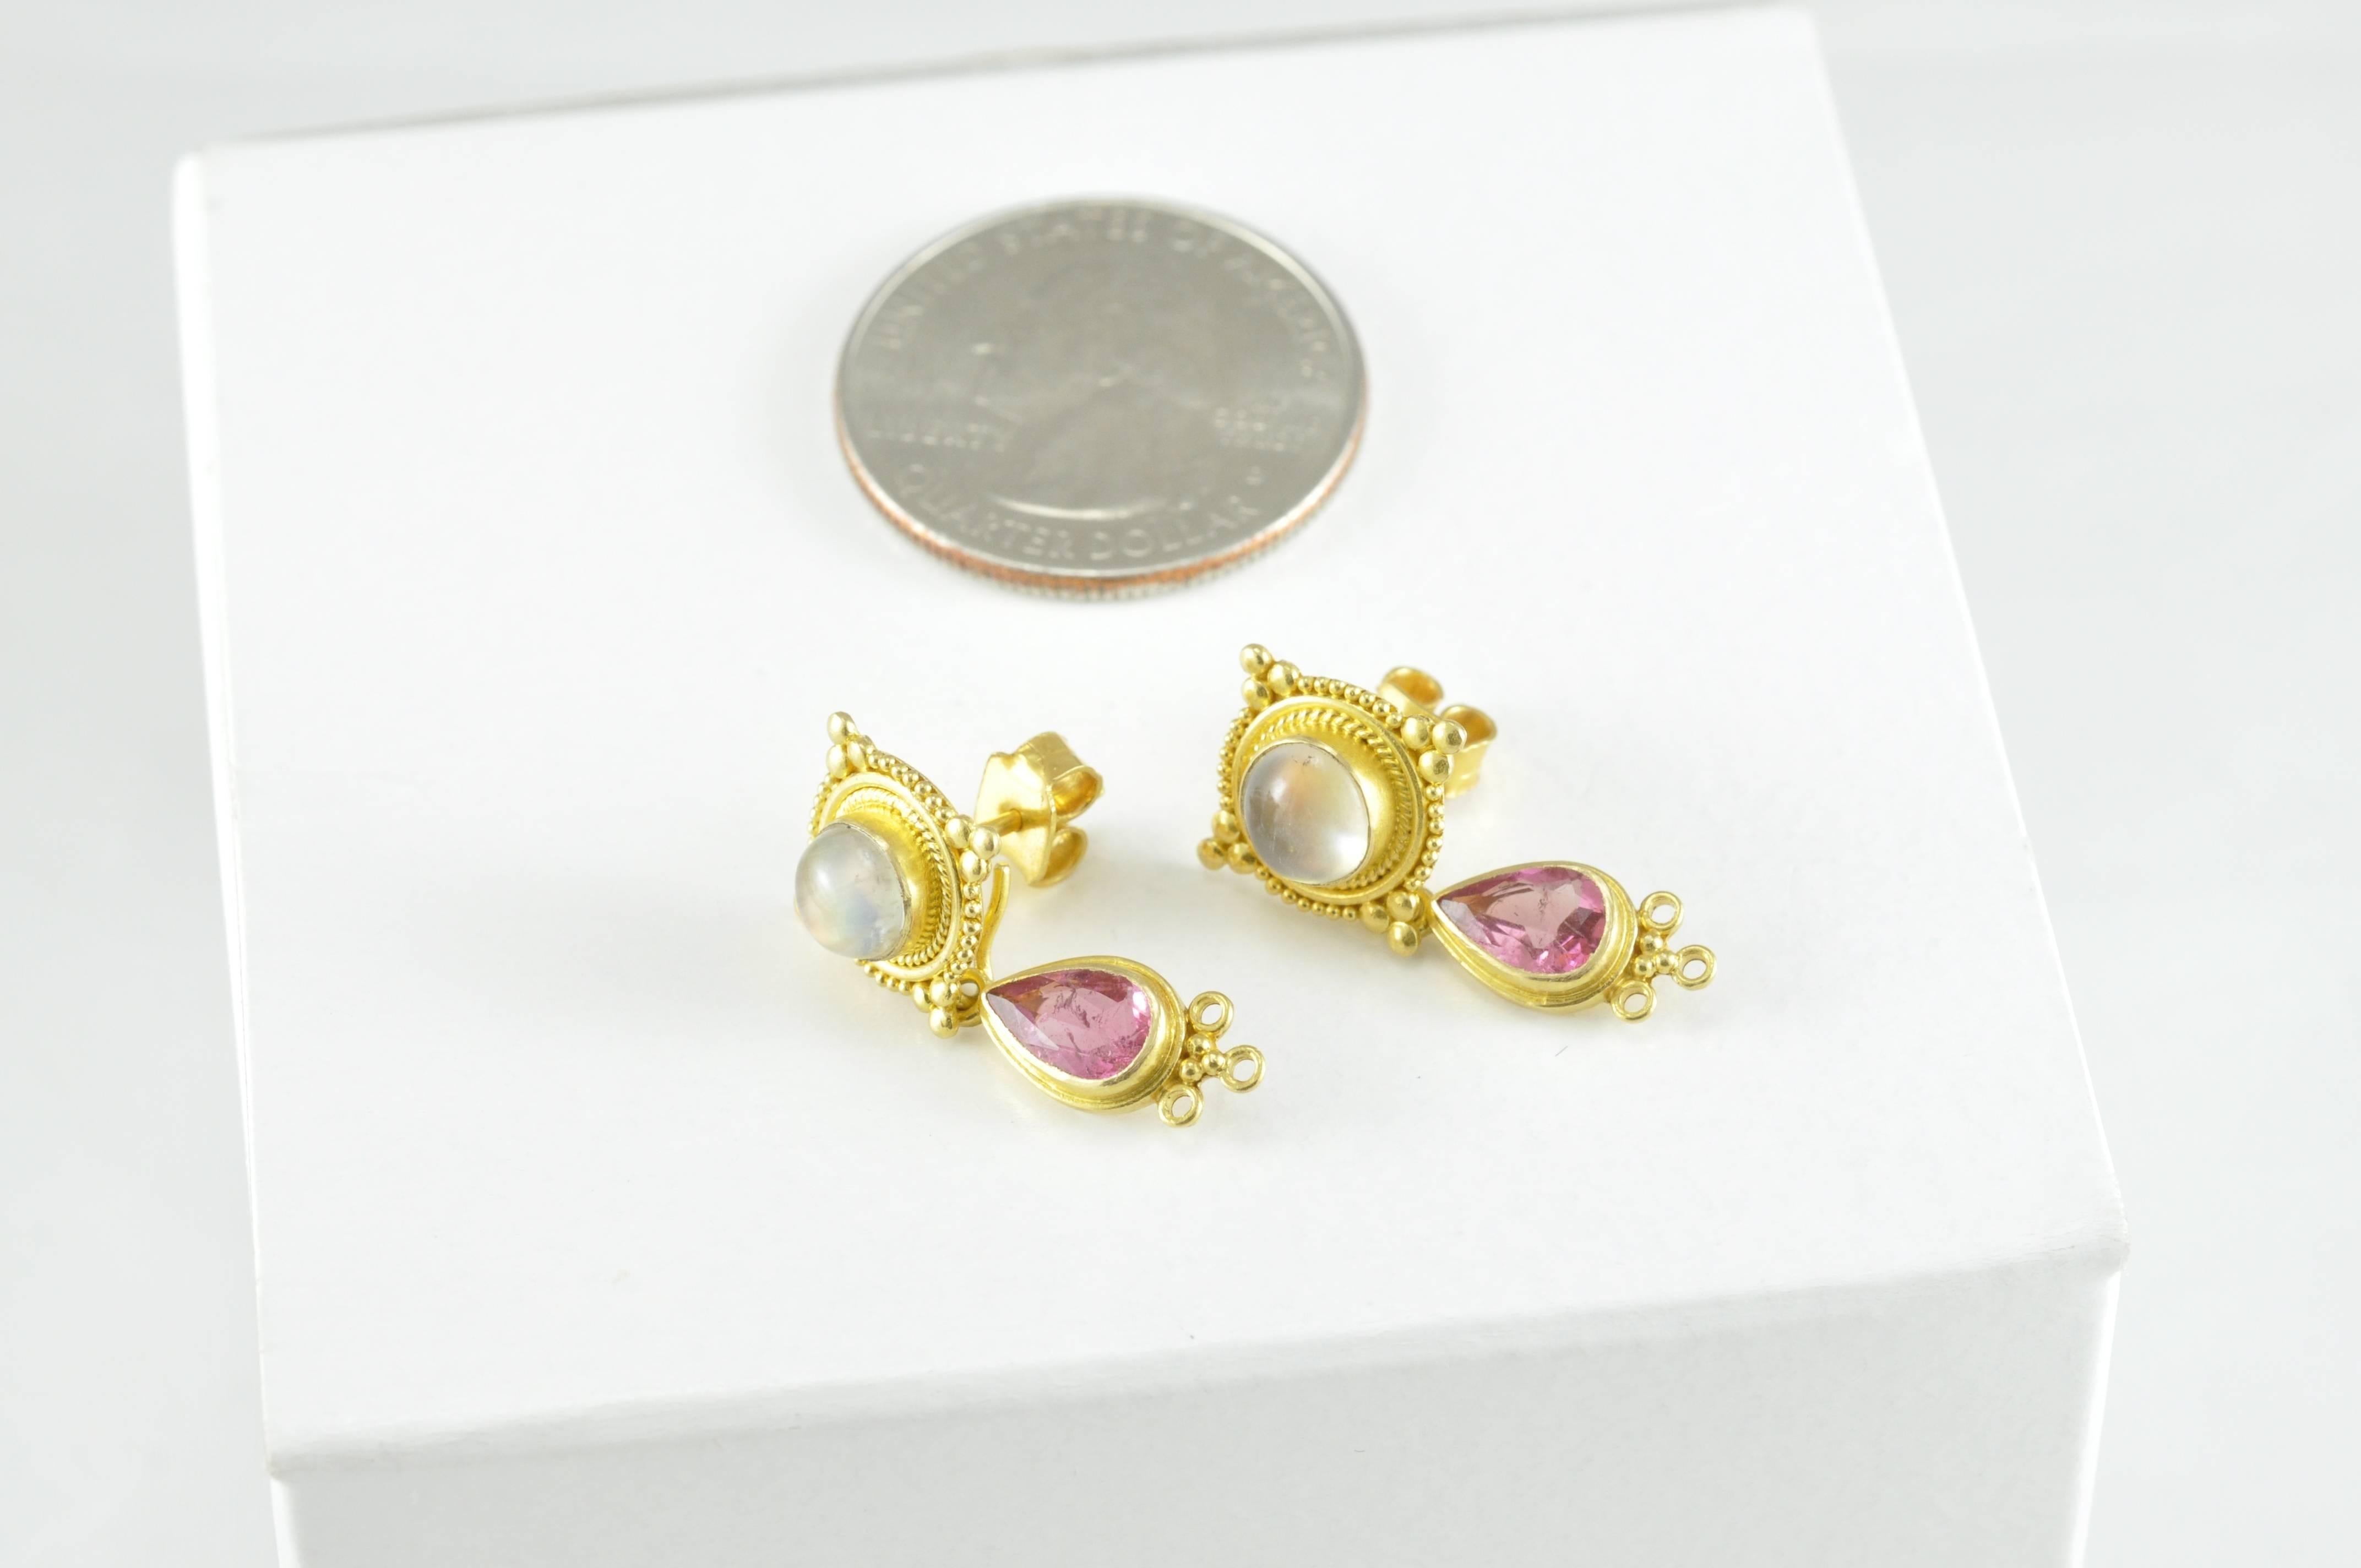 Granulated Gold and Moonstone and Pink Teardrop Earrings.  These are very sweet treats for the ear.  
Artists in Bali Indonesia have handed down their craft from generation to generation.   
These earrings come from the acclaimed designer, Kimarie.